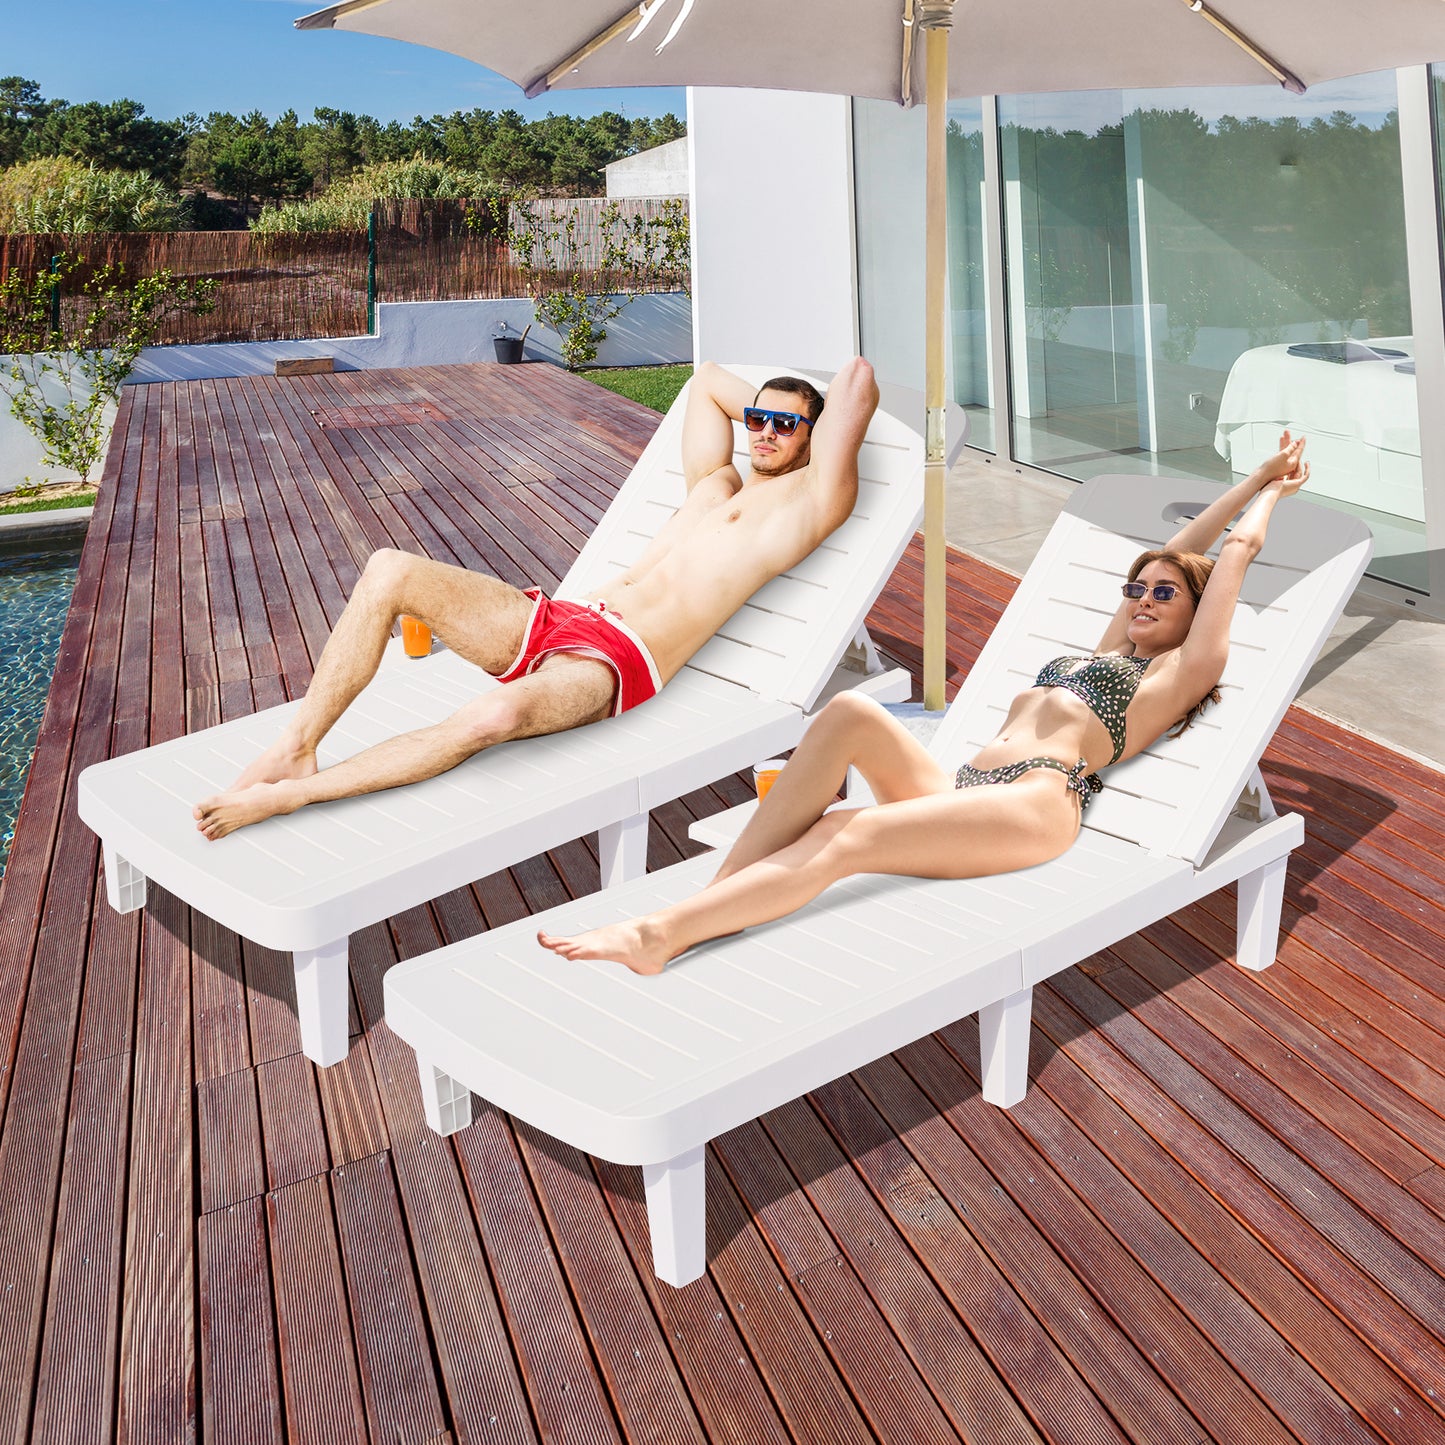 SYNGAR Patio Adjustable Chaise Loungers, Set of 2, Outdoor White PP Resin Lounge Chairs with 5 Angles Adjustable, Poolside Reclining Lounge Chairs, Sun Lounger for Outside, D7052